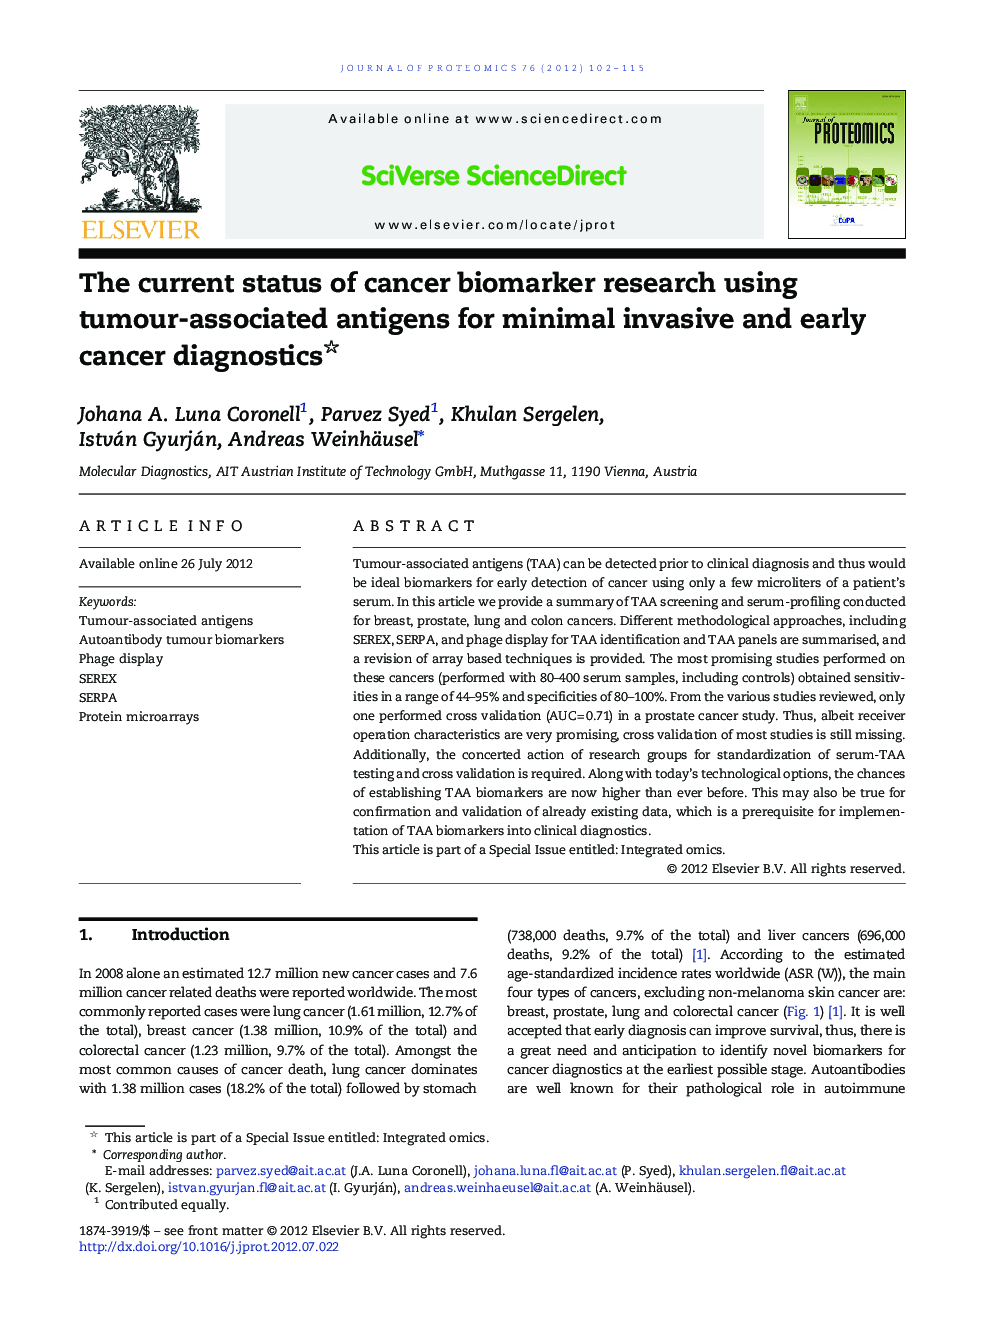 The current status of cancer biomarker research using tumour-associated antigens for minimal invasive and early cancer diagnostics